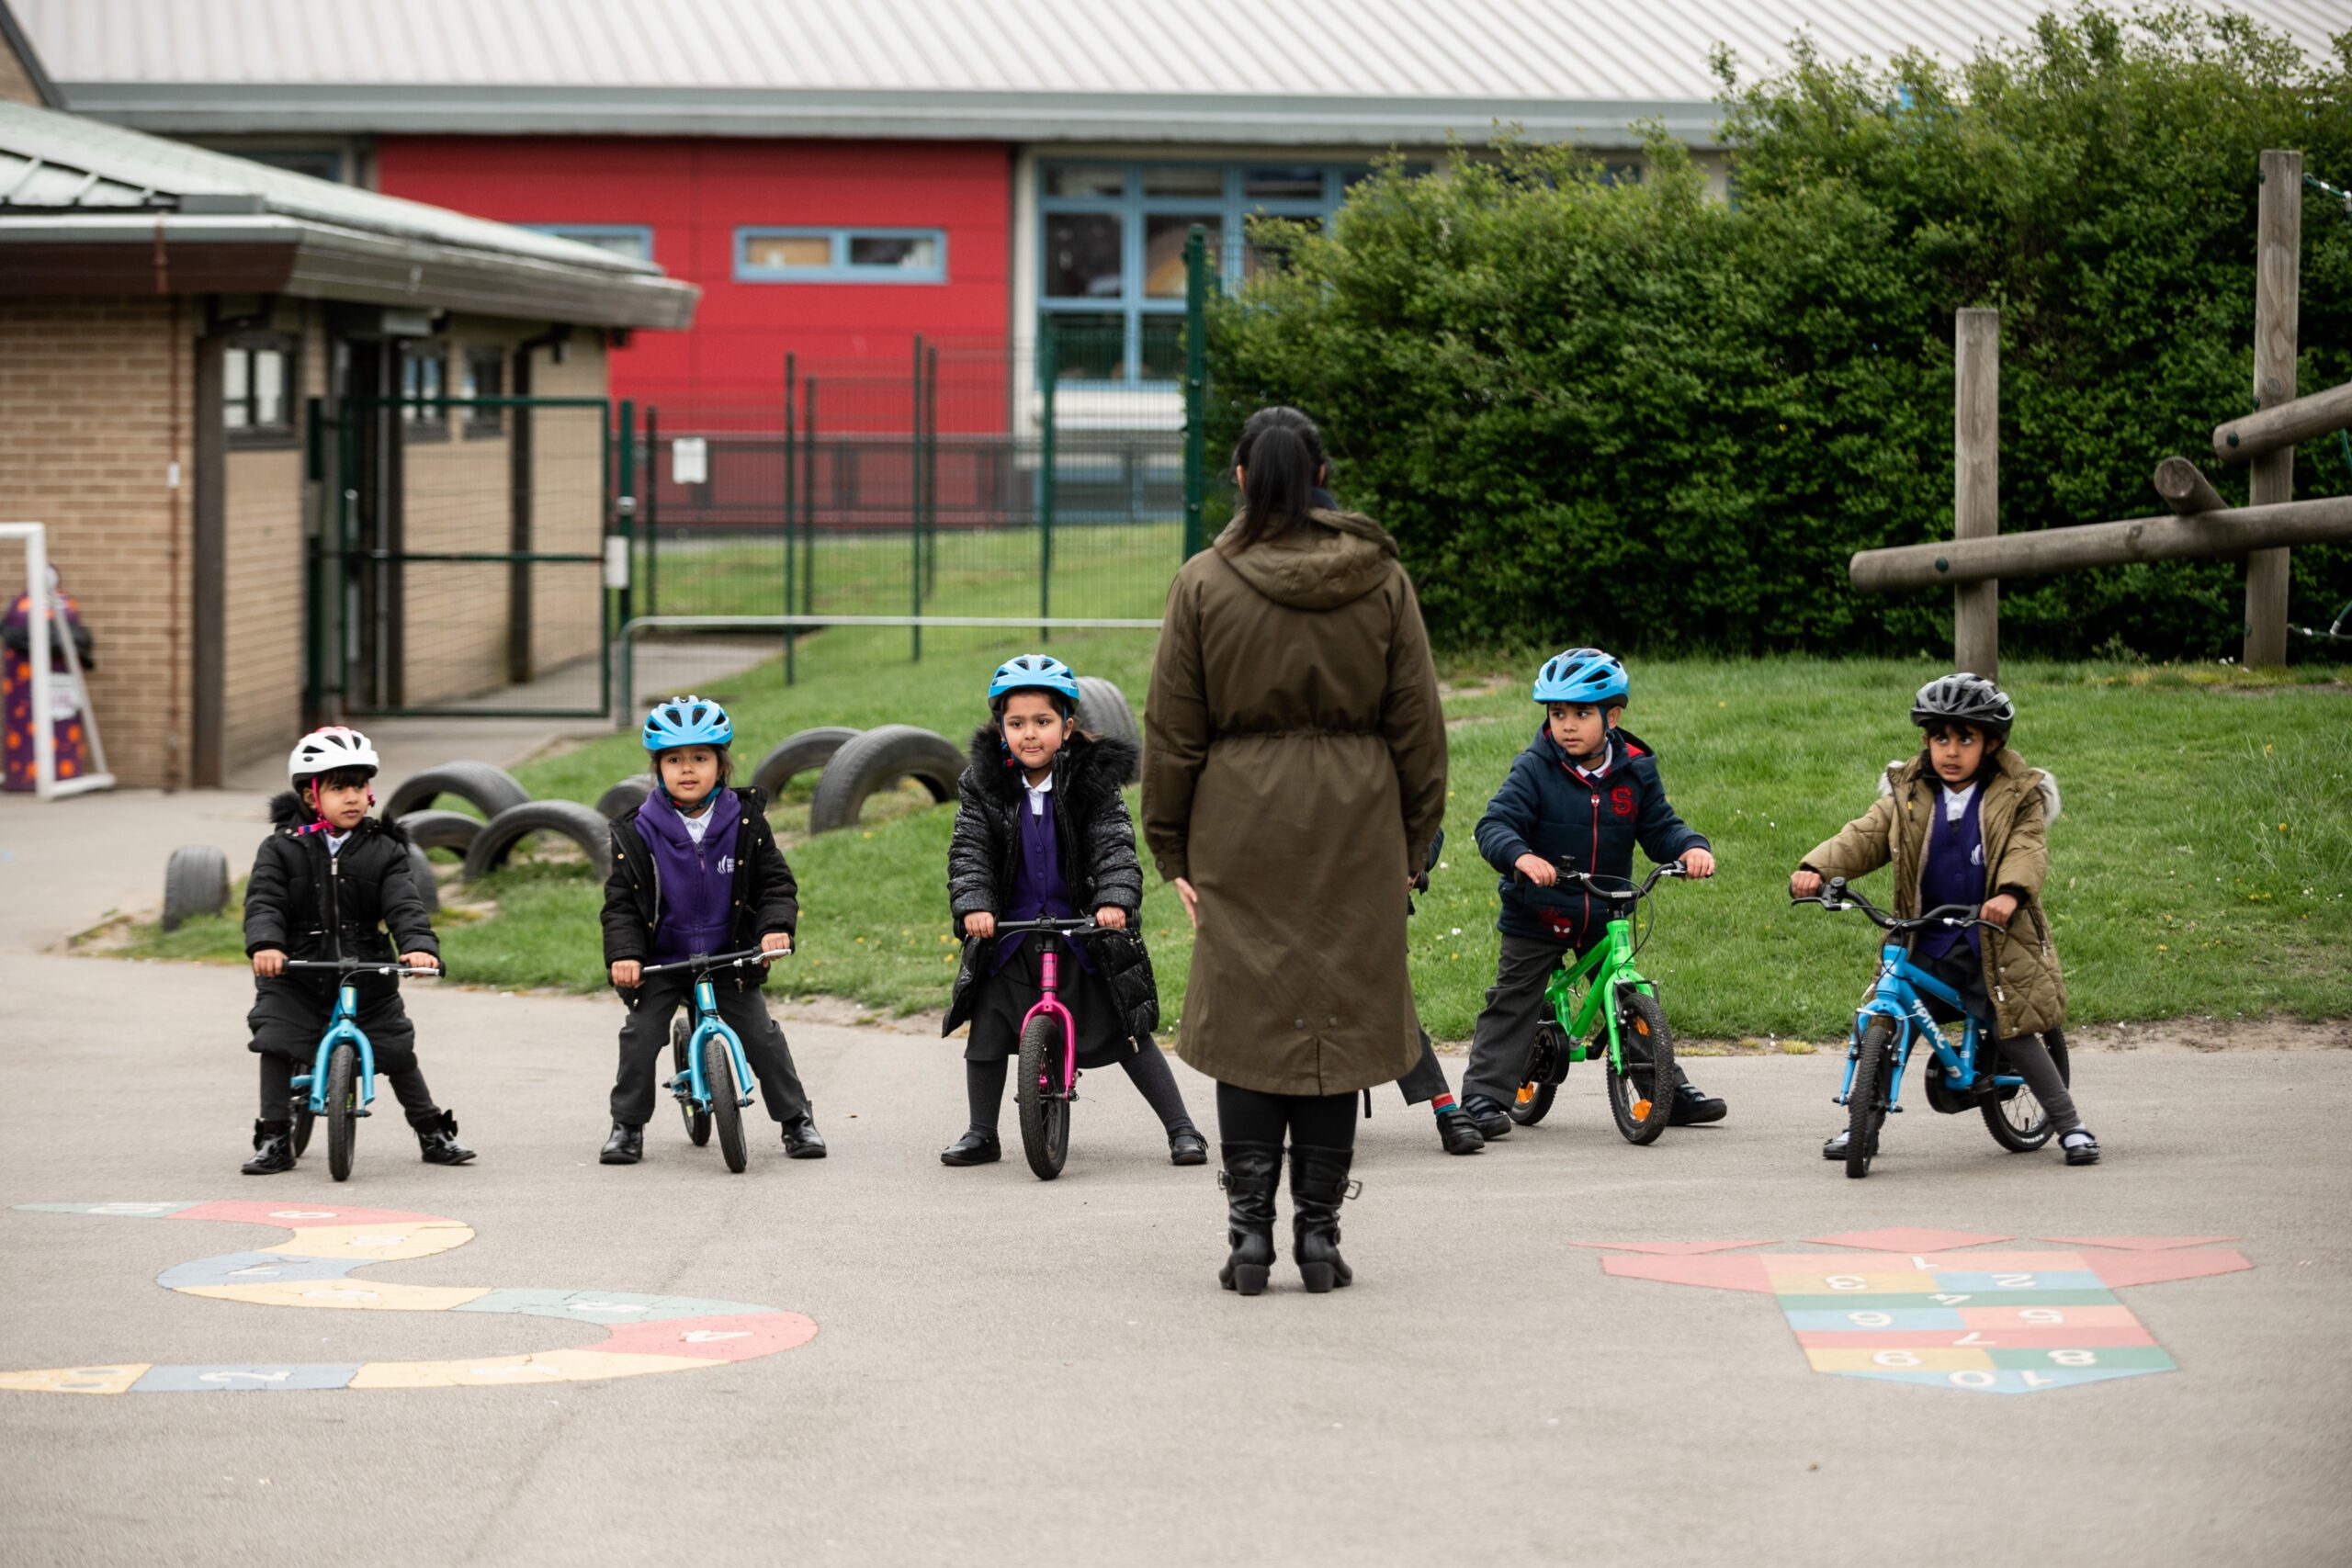 Young school pupils wearing purple school jumpers and sitting on balance bikes are facing the camera, their teacher faces them with her back to the camera. They are on a school playground.